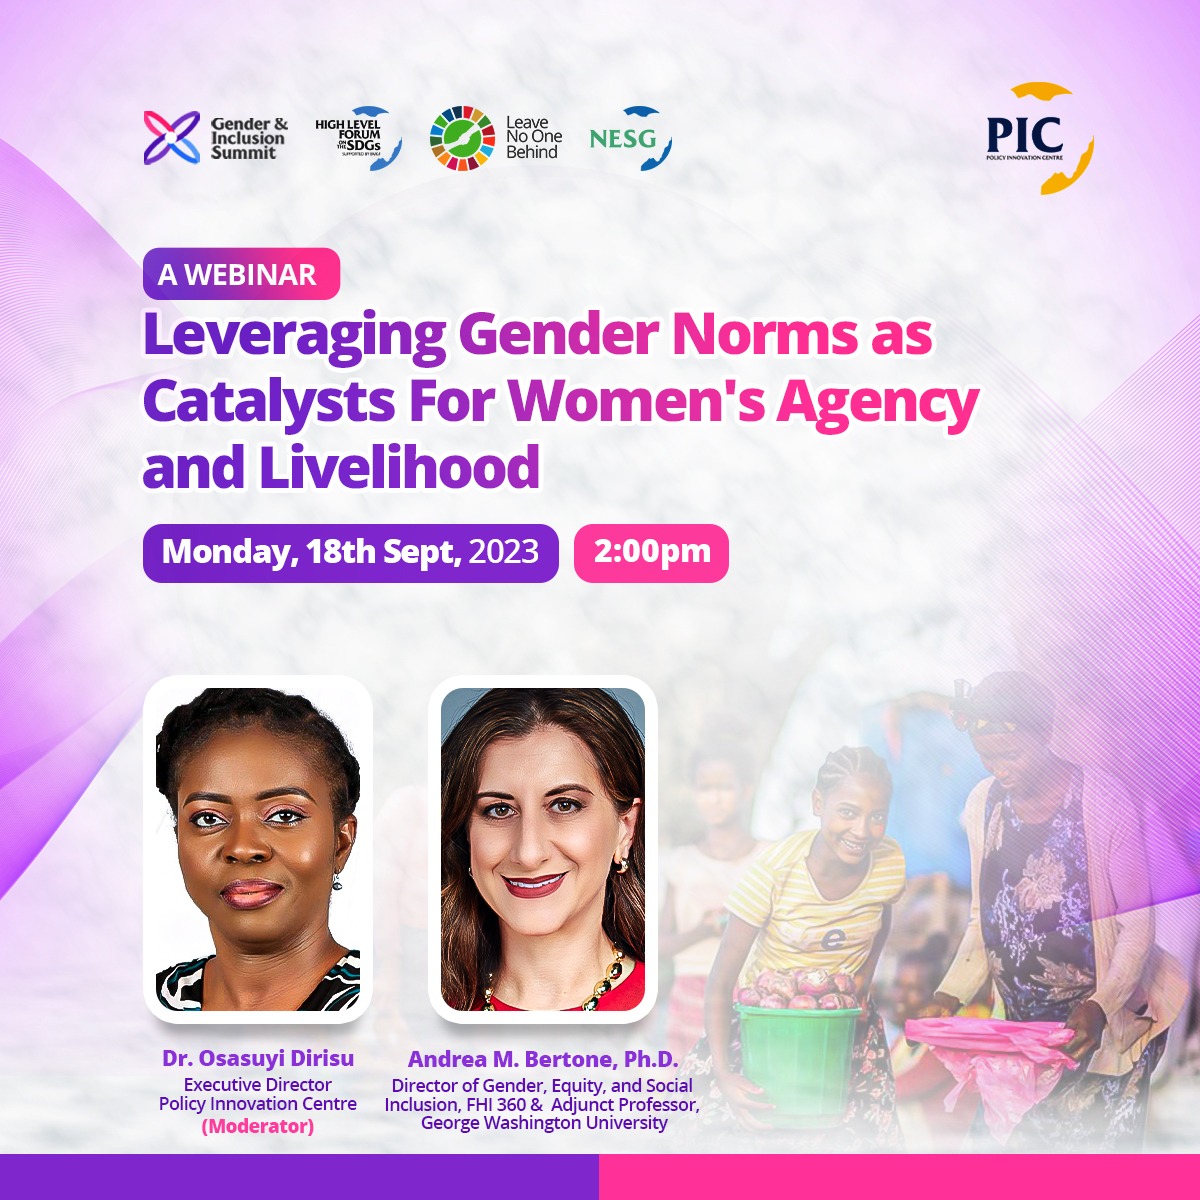 Event | Leveraging Gender Norms as Catalyst For Women's Agency and Livelihood